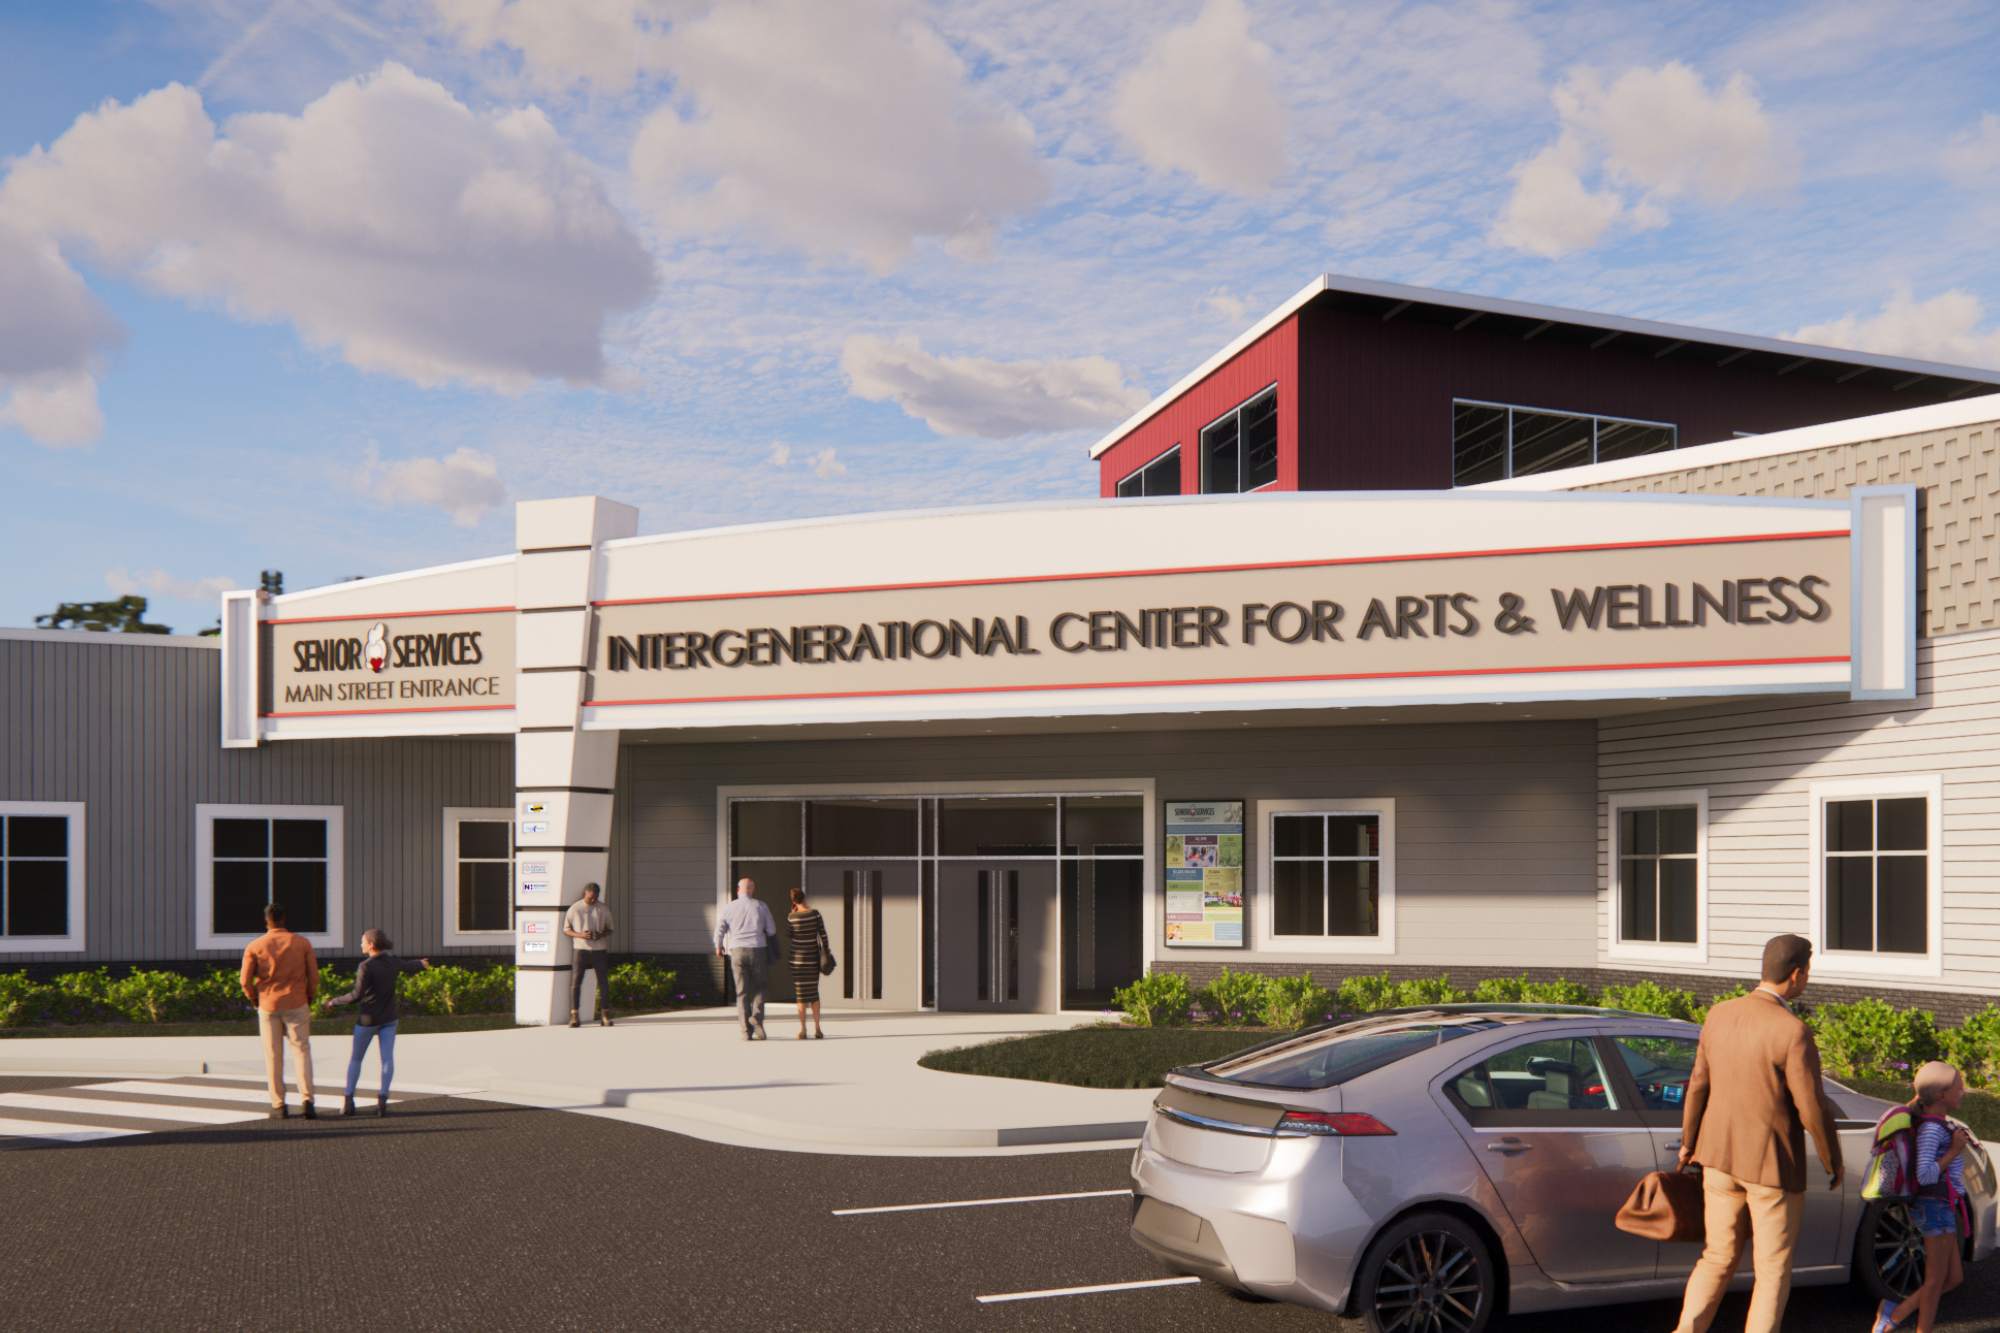 Intergenerational Center for Arts and Wellness